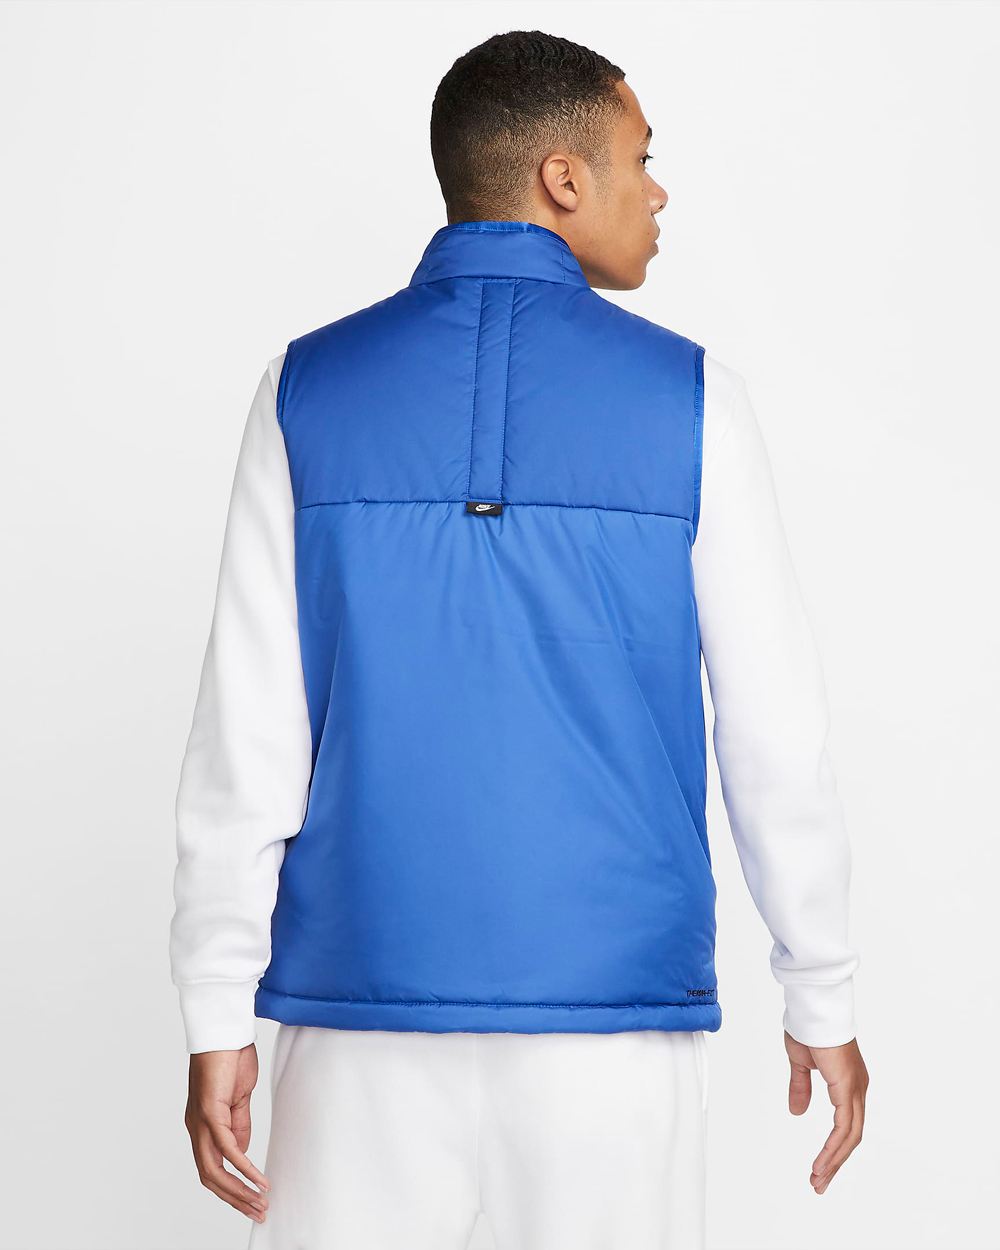 nike-sportswear-therma-fit-legacy-vest-game-royal-2